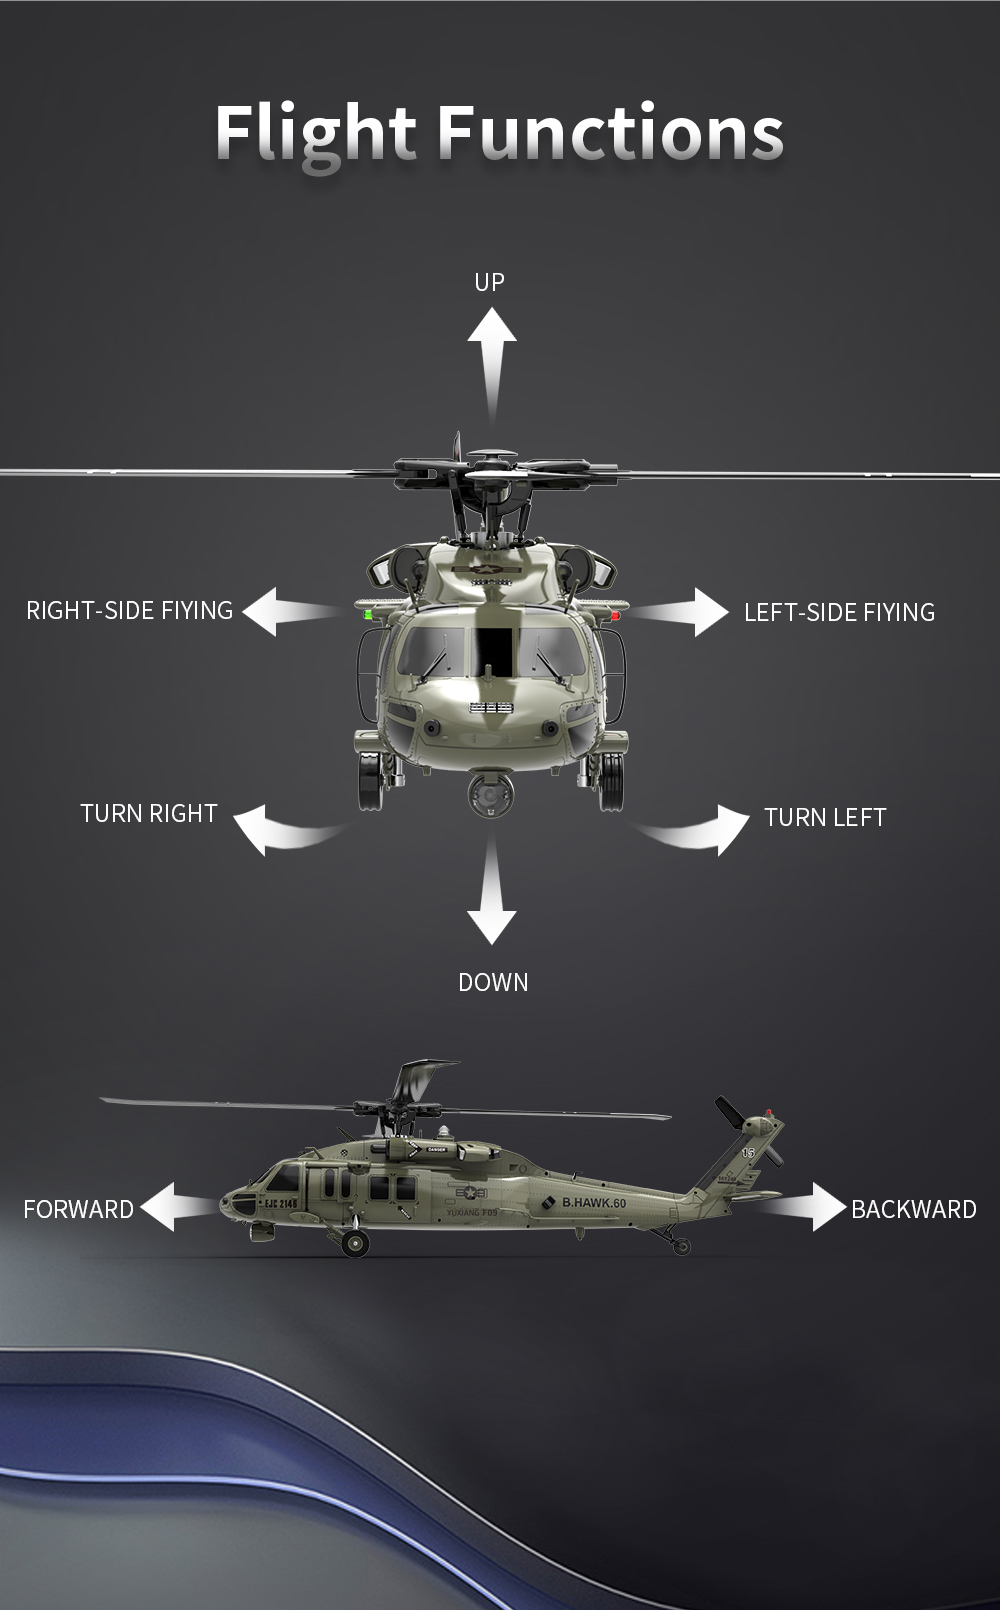 UH-60 Black Hawk RC Military Helicopter (UH-60A/L Black Hawk Helicopter, CH-47D Chinook, Bell UH-1N Iroquois)